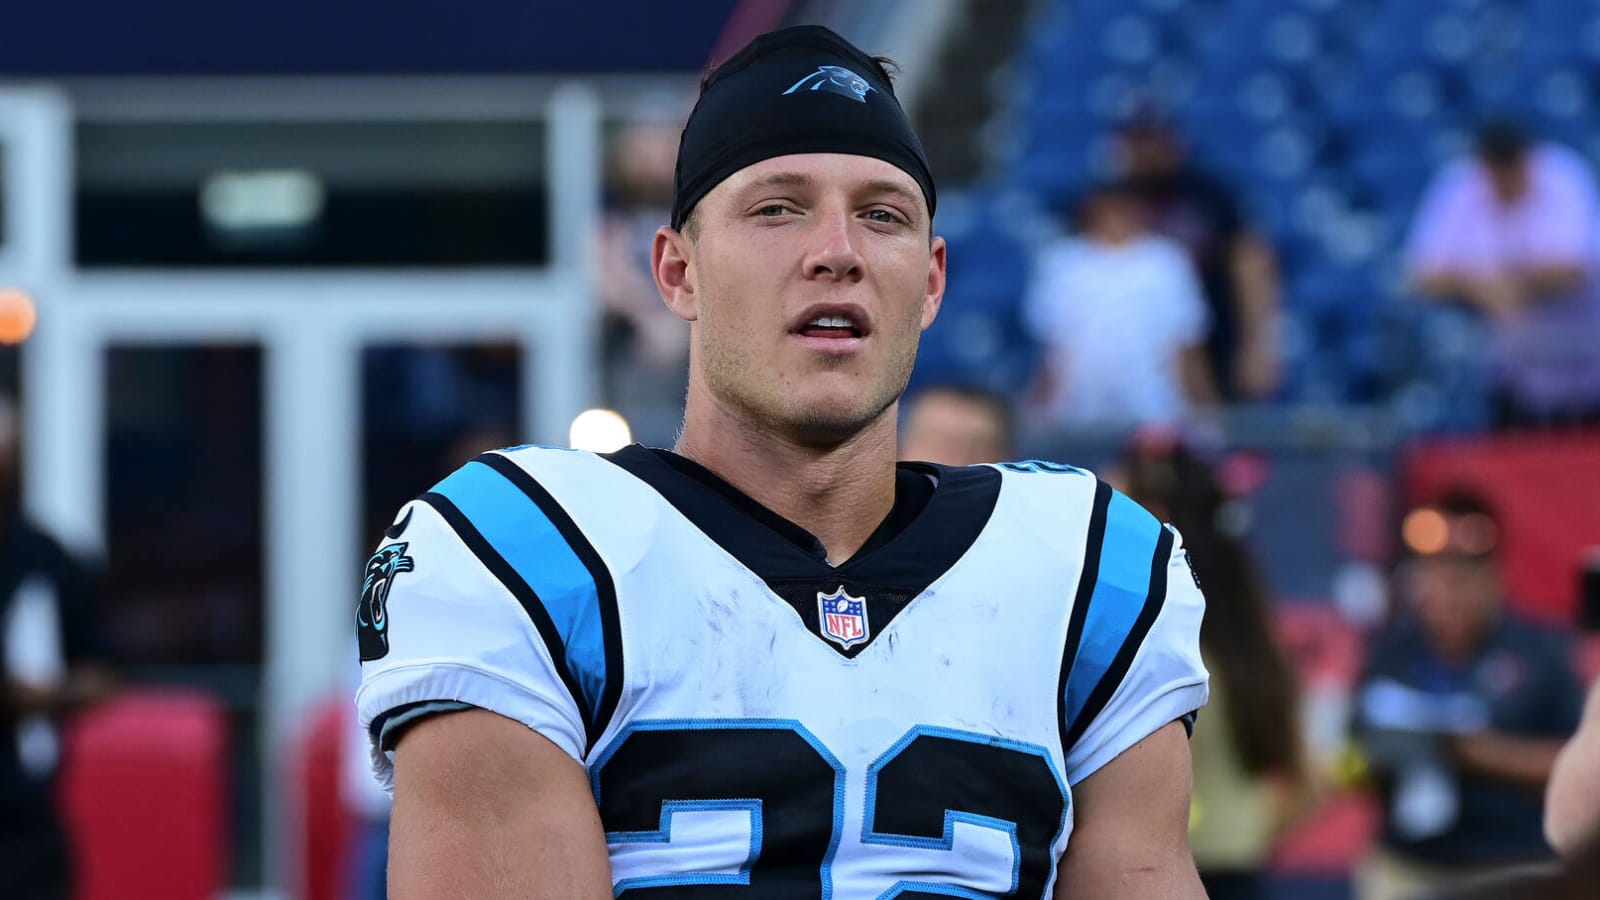 Analyst: Christian McCaffrey will have bounce-back game